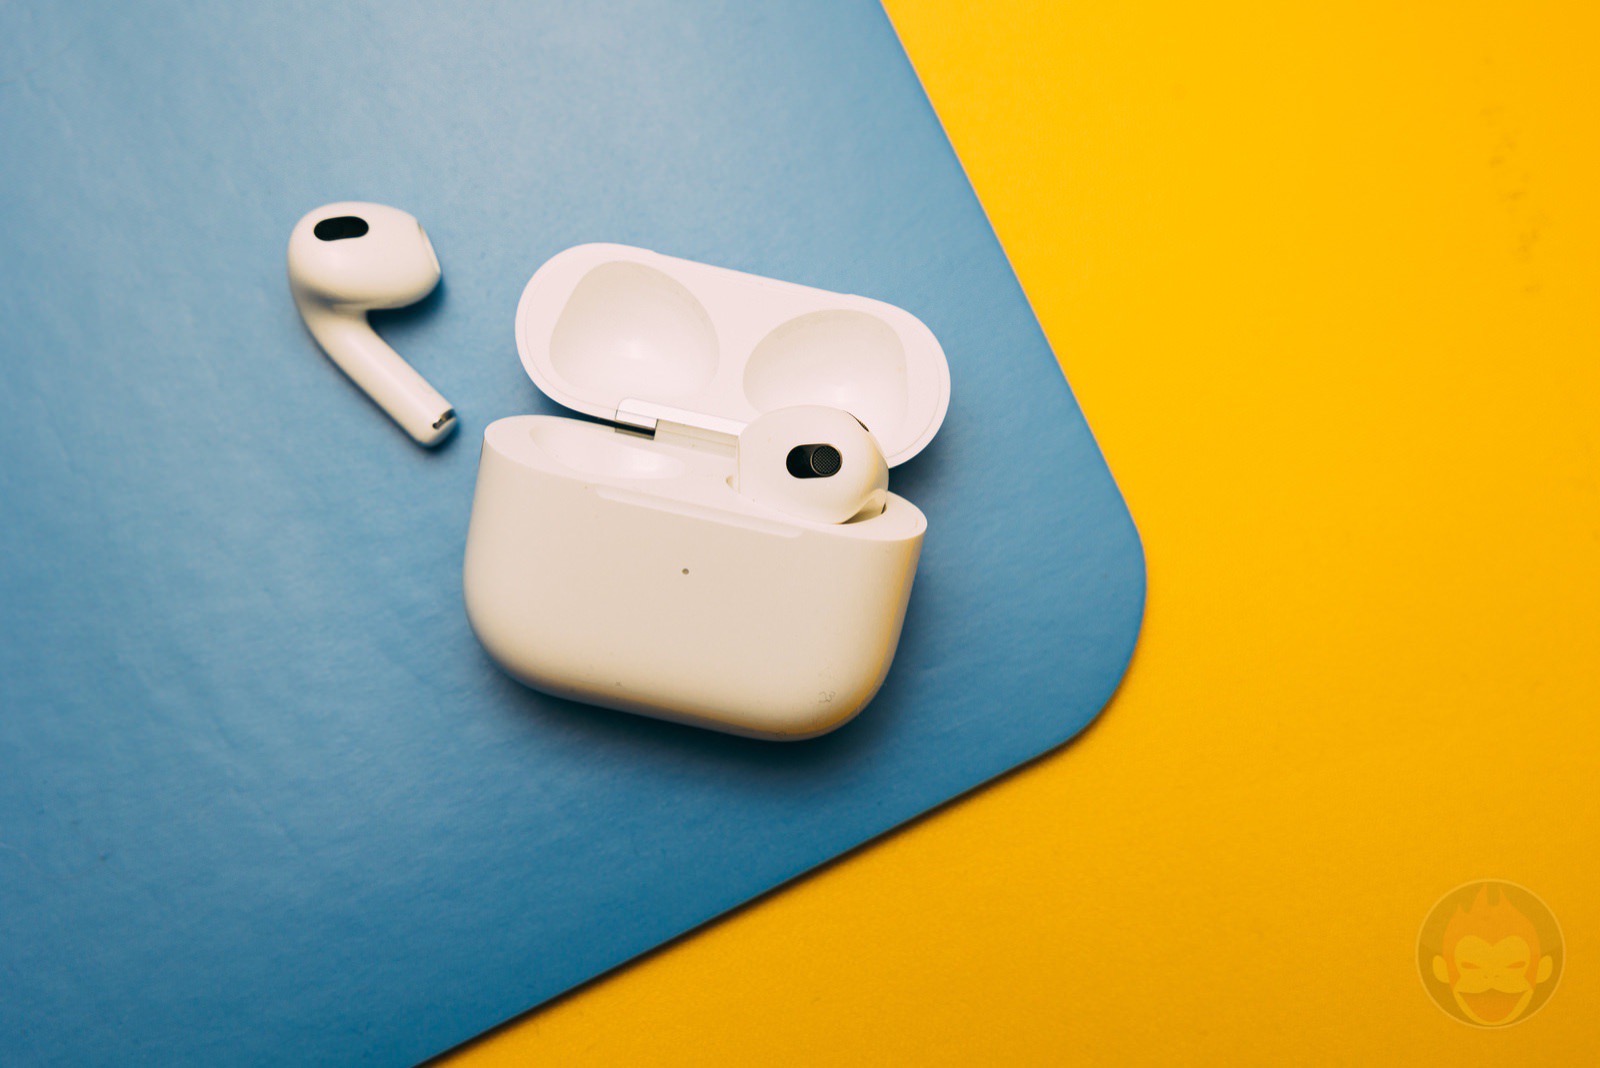 AirPods-3-with-blue-and-yellow-background-01.jpg